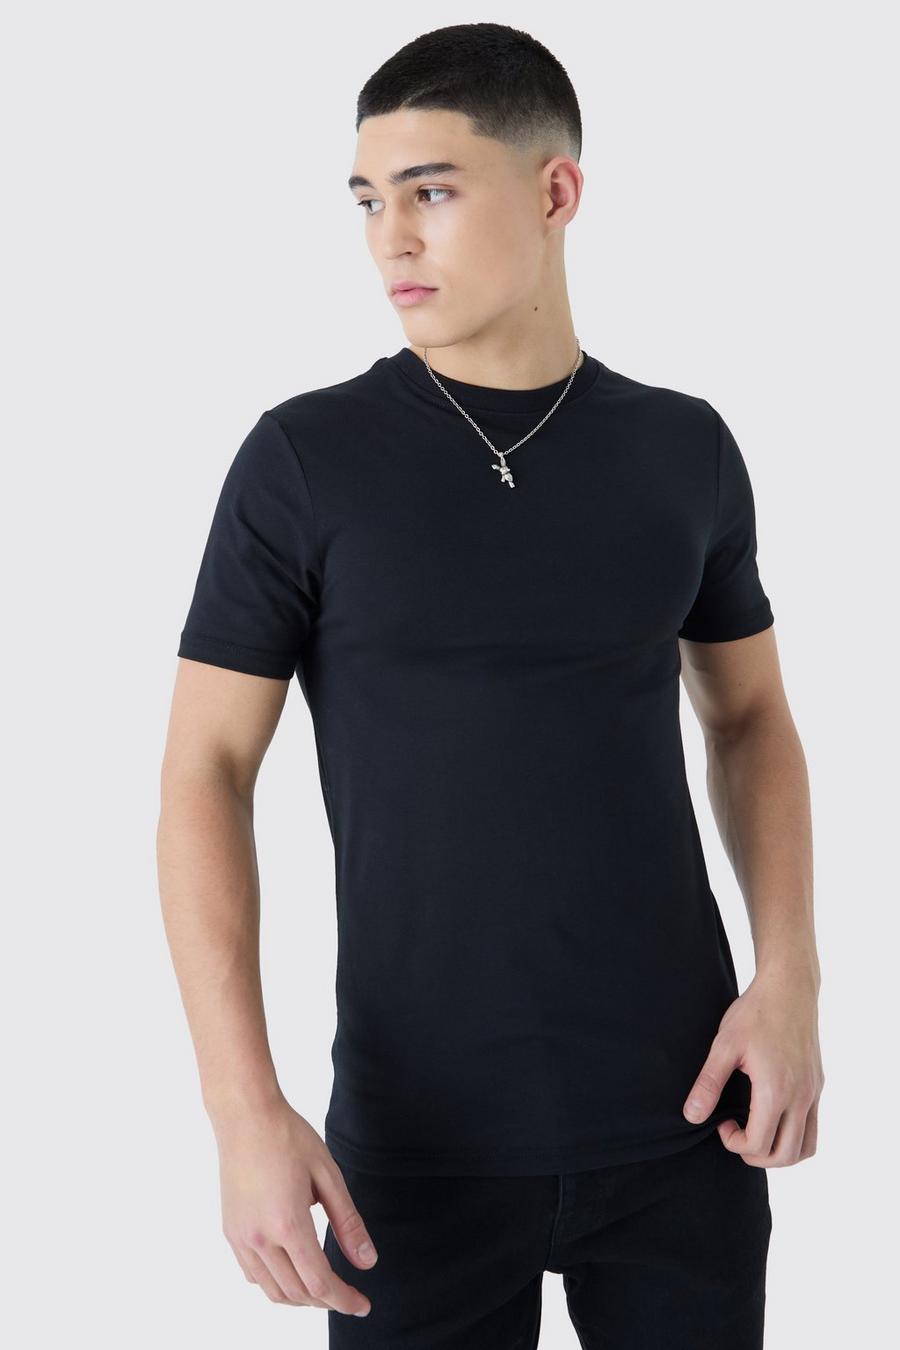 Black Basic Muscle Fit T-shirt image number 1